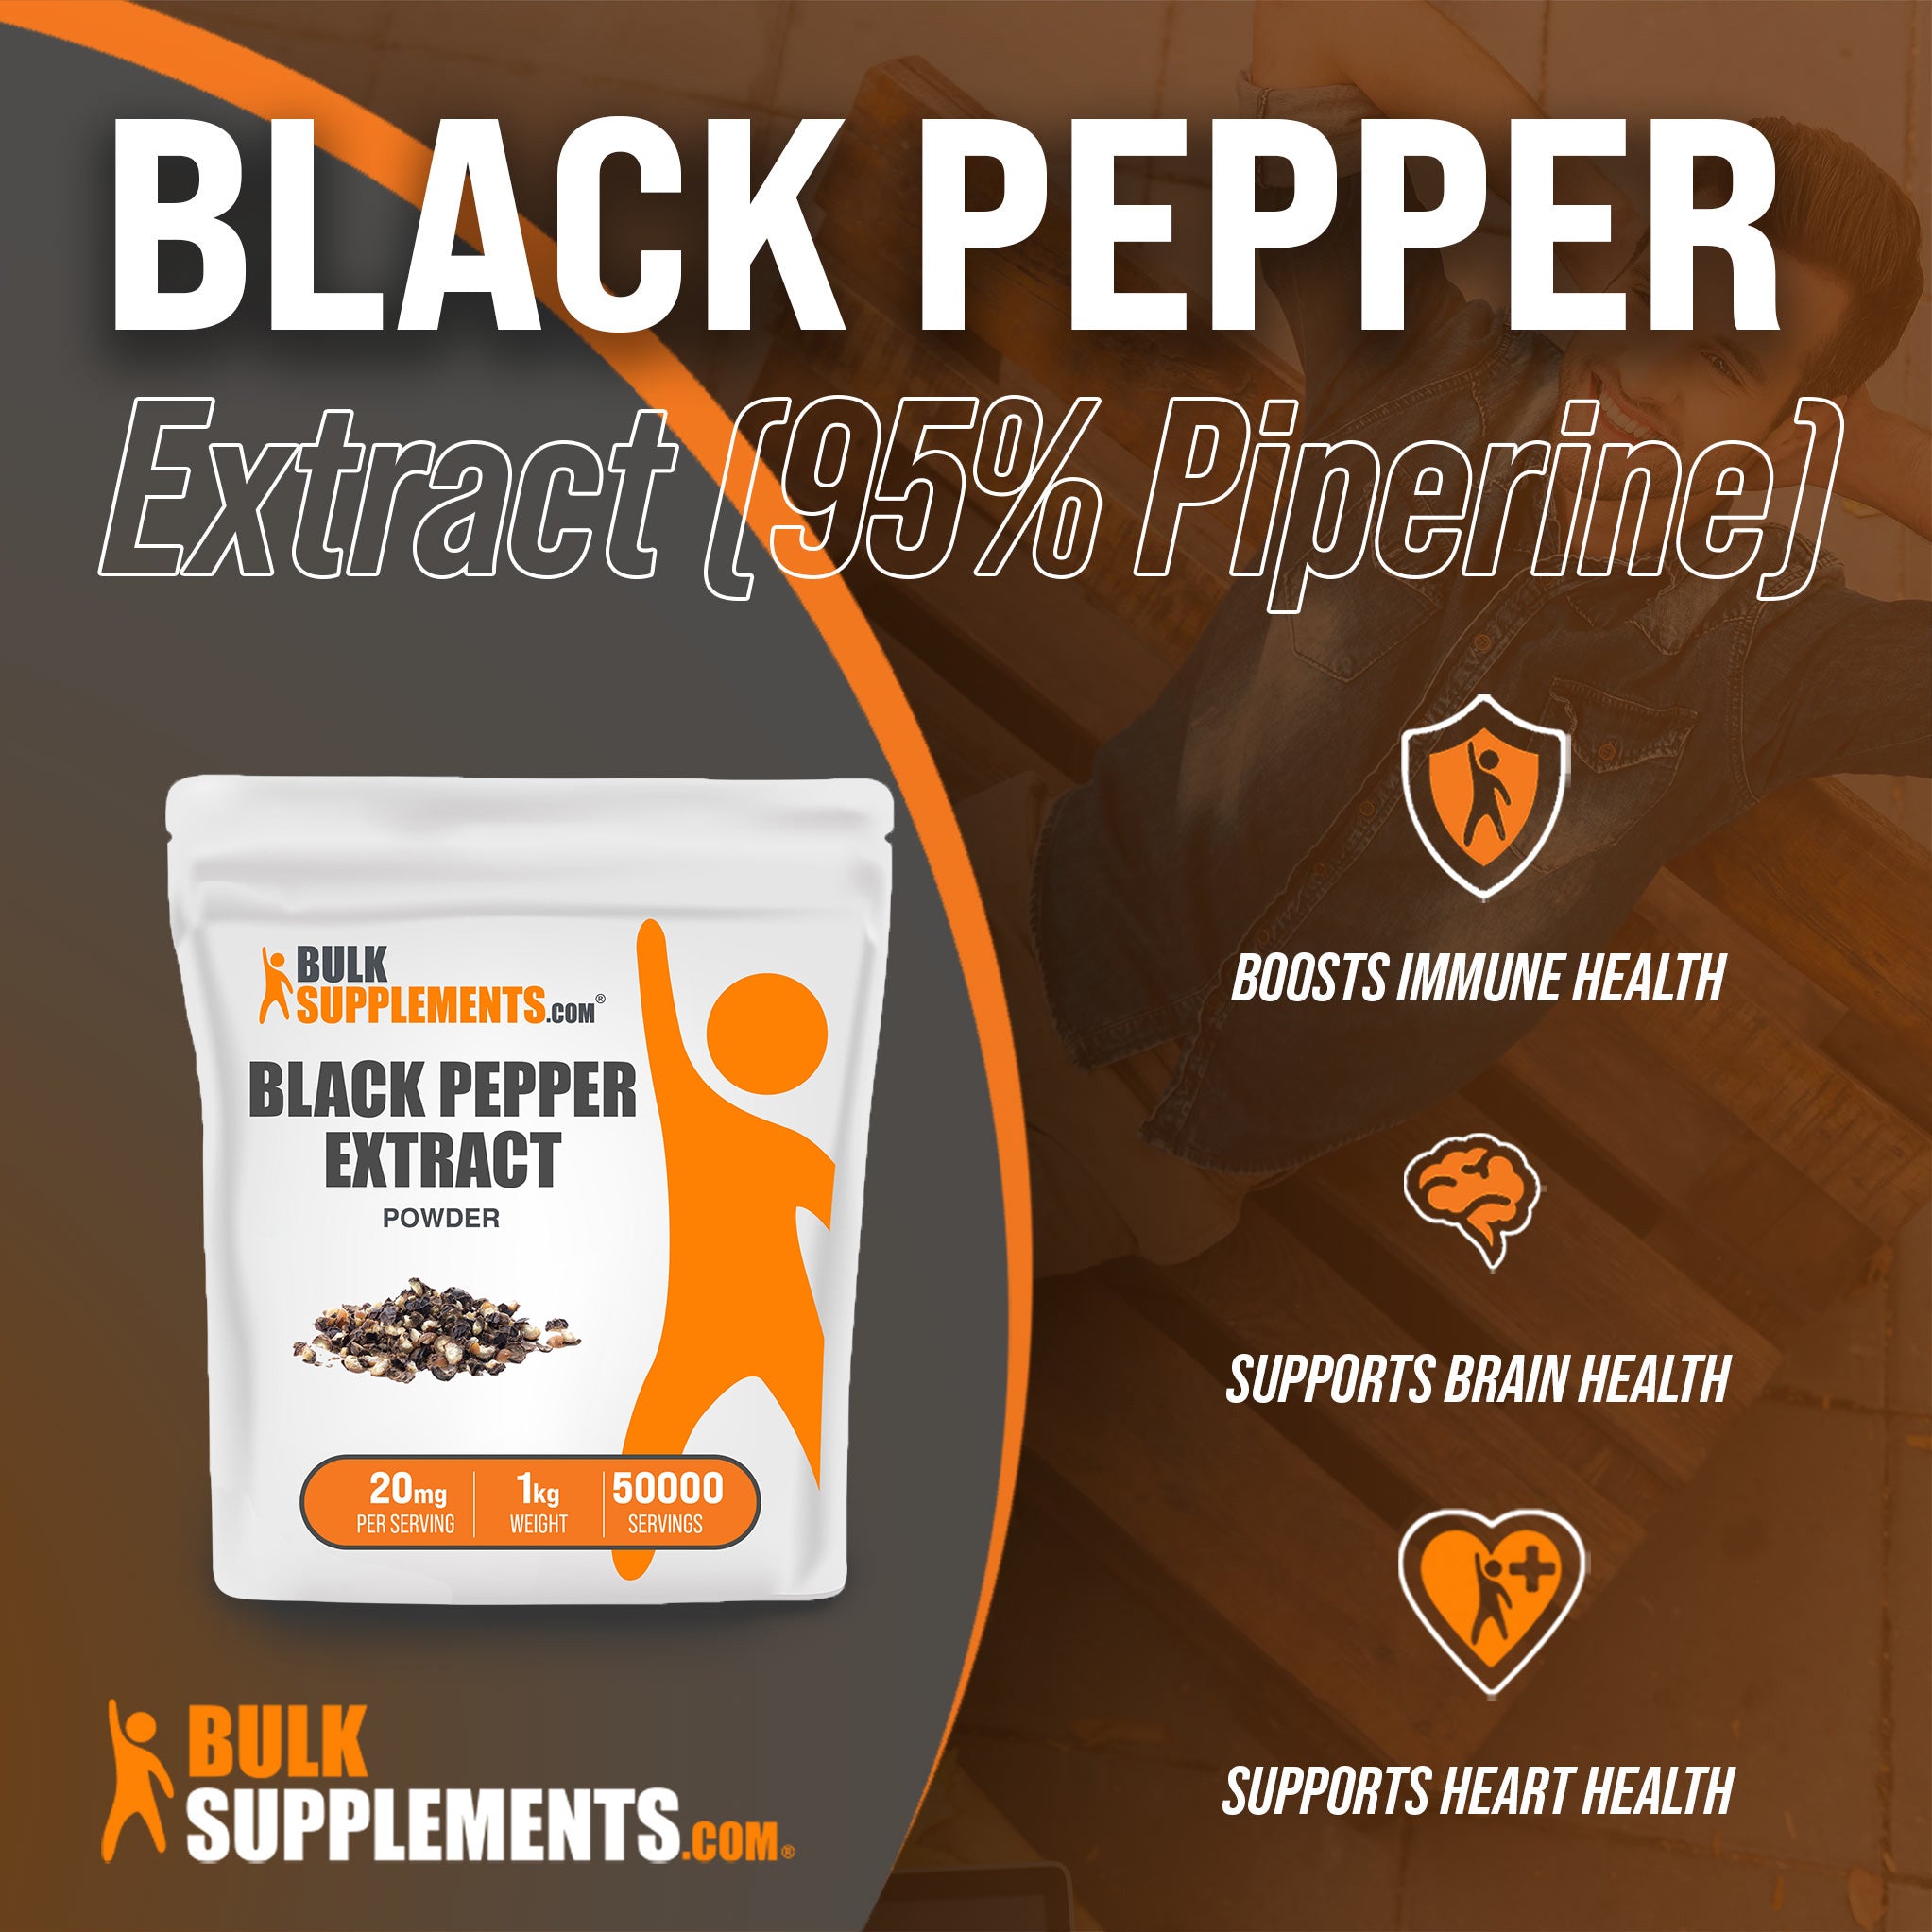 1kg bags of black pepper extract are a great source of piperine